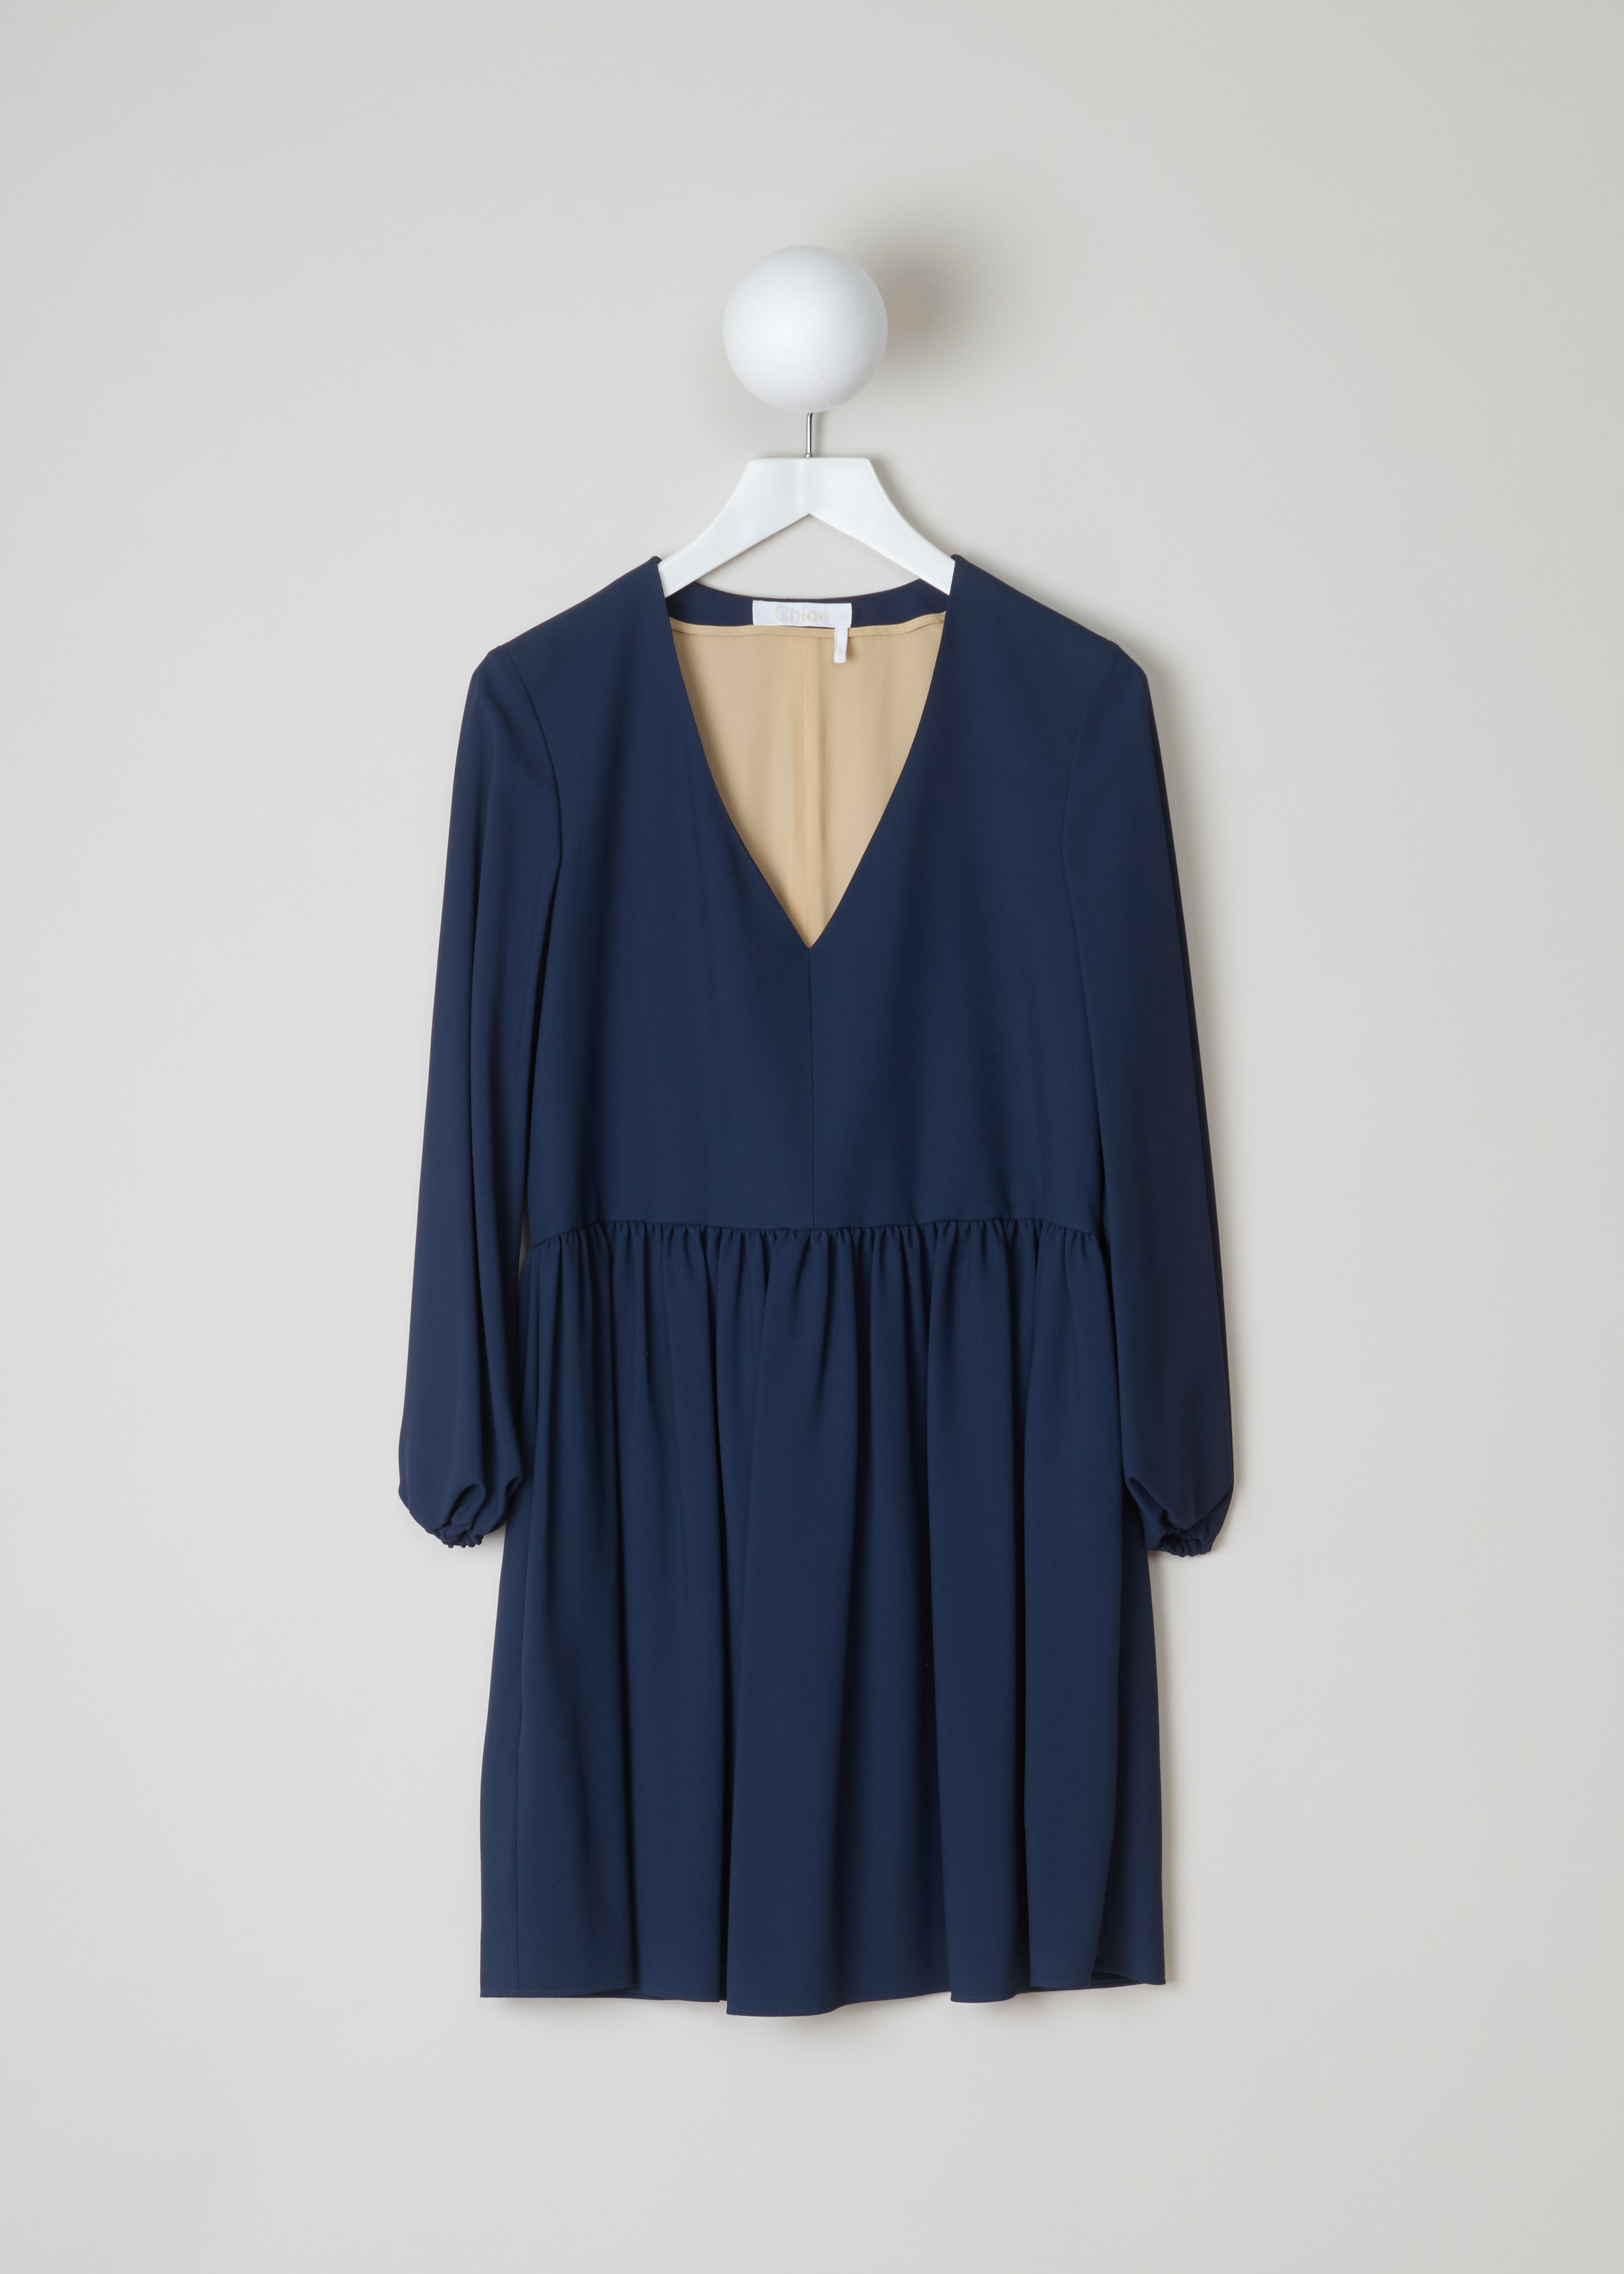 ChloÃ© Gathered deep blue dress 17SRO65_17S37_7B5 deep blue front. Deep blue dress with a V-neck. This model has loose sleeves and gathered cuffs. The straight cut has small pleats around the waist and a midi length. As closure this dress has an invisible zipper on the side.